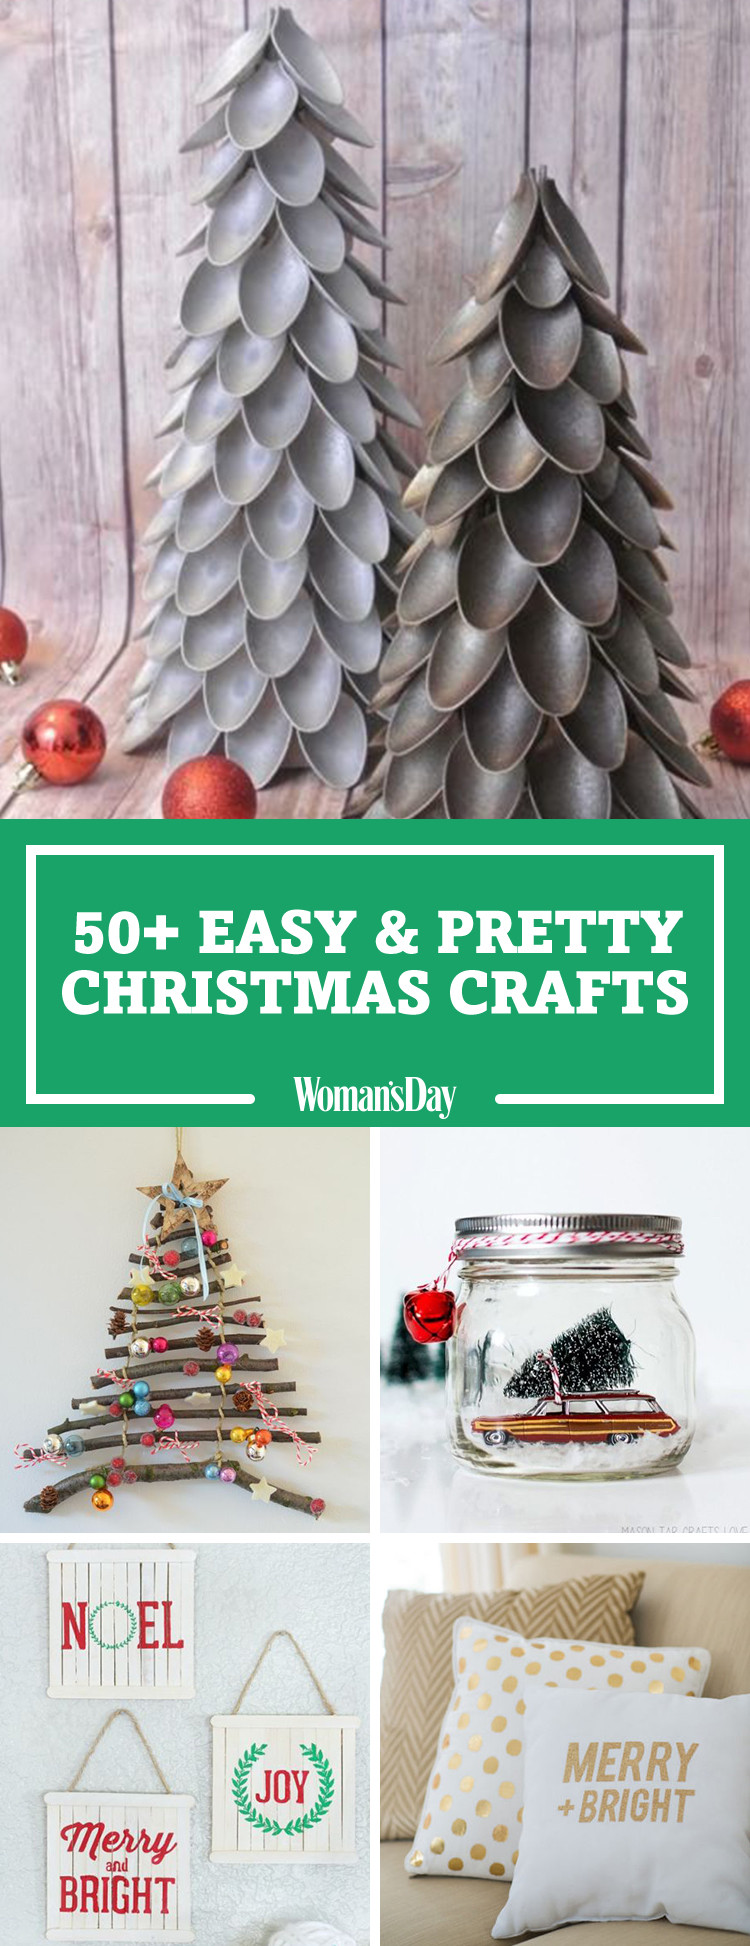 Easy Christmas Craft Gifts
 55 Easy Christmas Crafts Simple DIY Holiday Craft Ideas